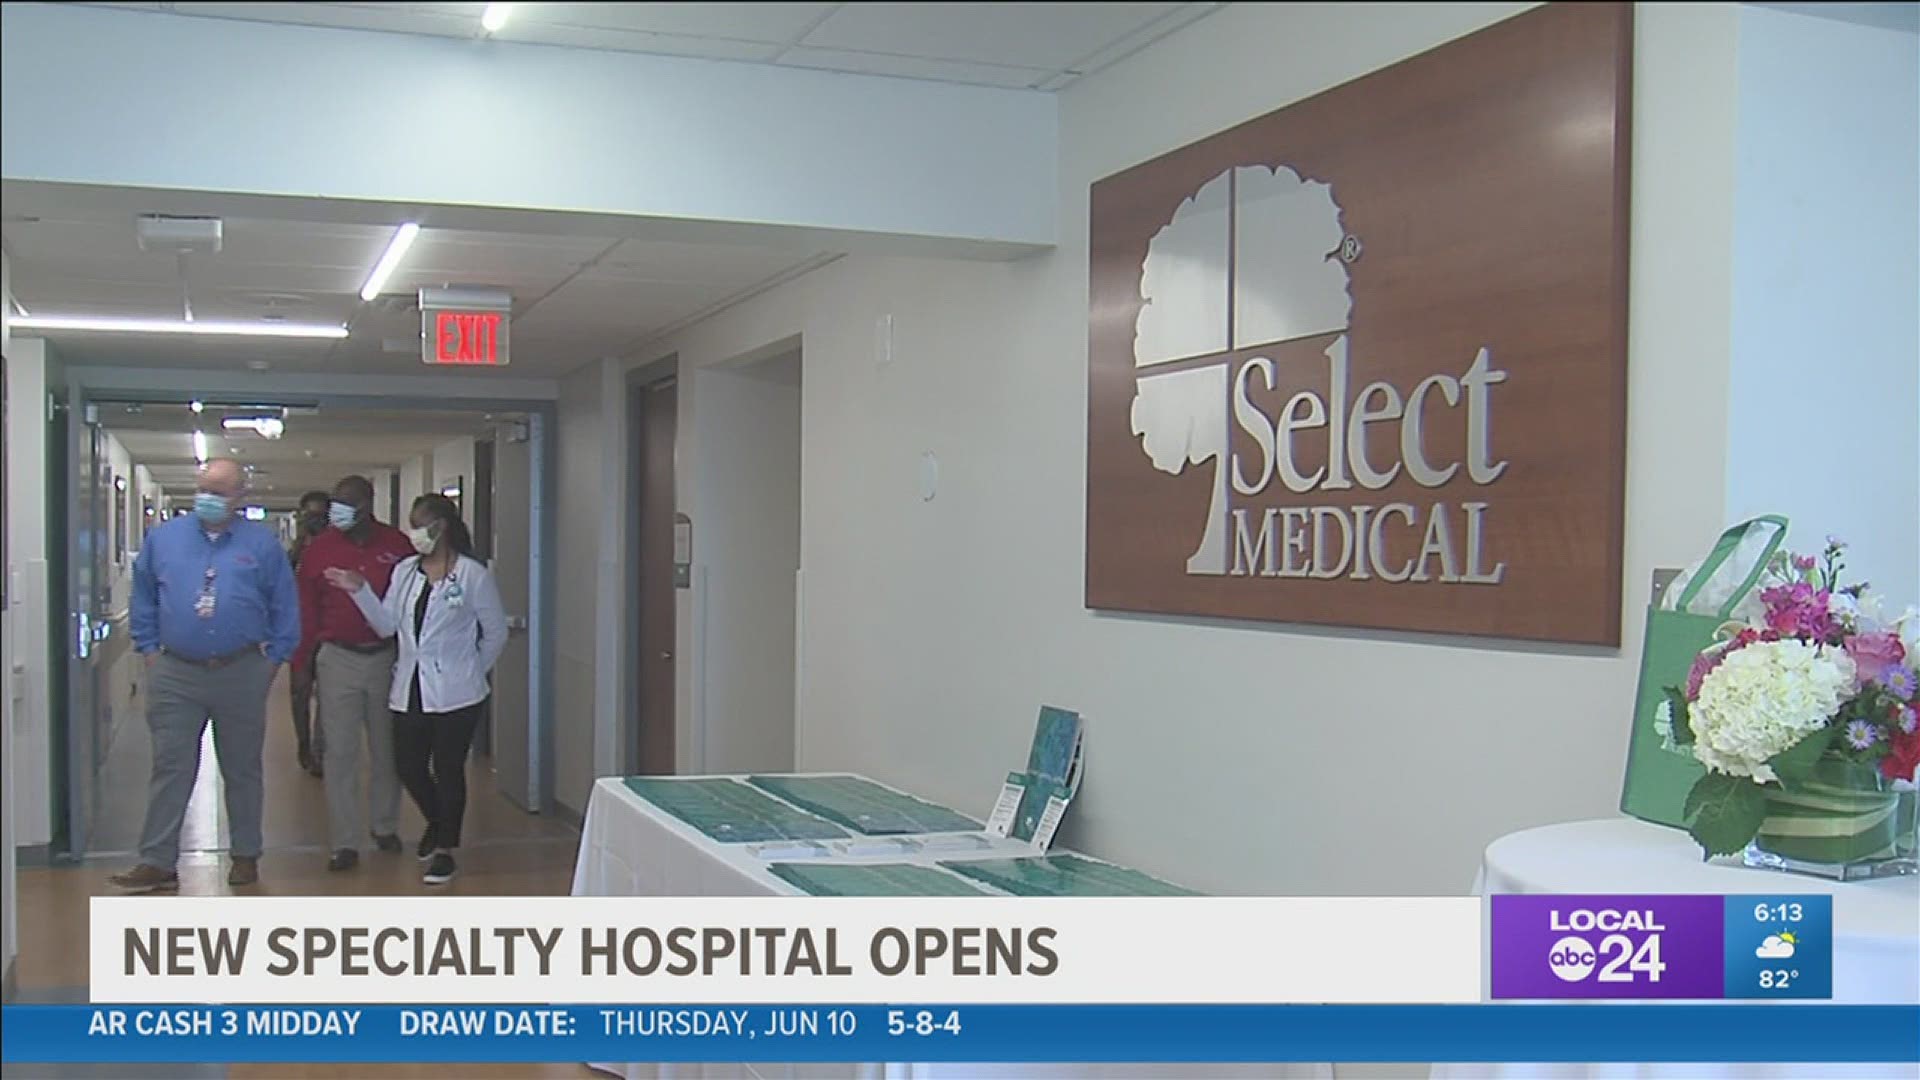 “Our patients can stay with us for at least 25 days in order to receive medically complex services.”